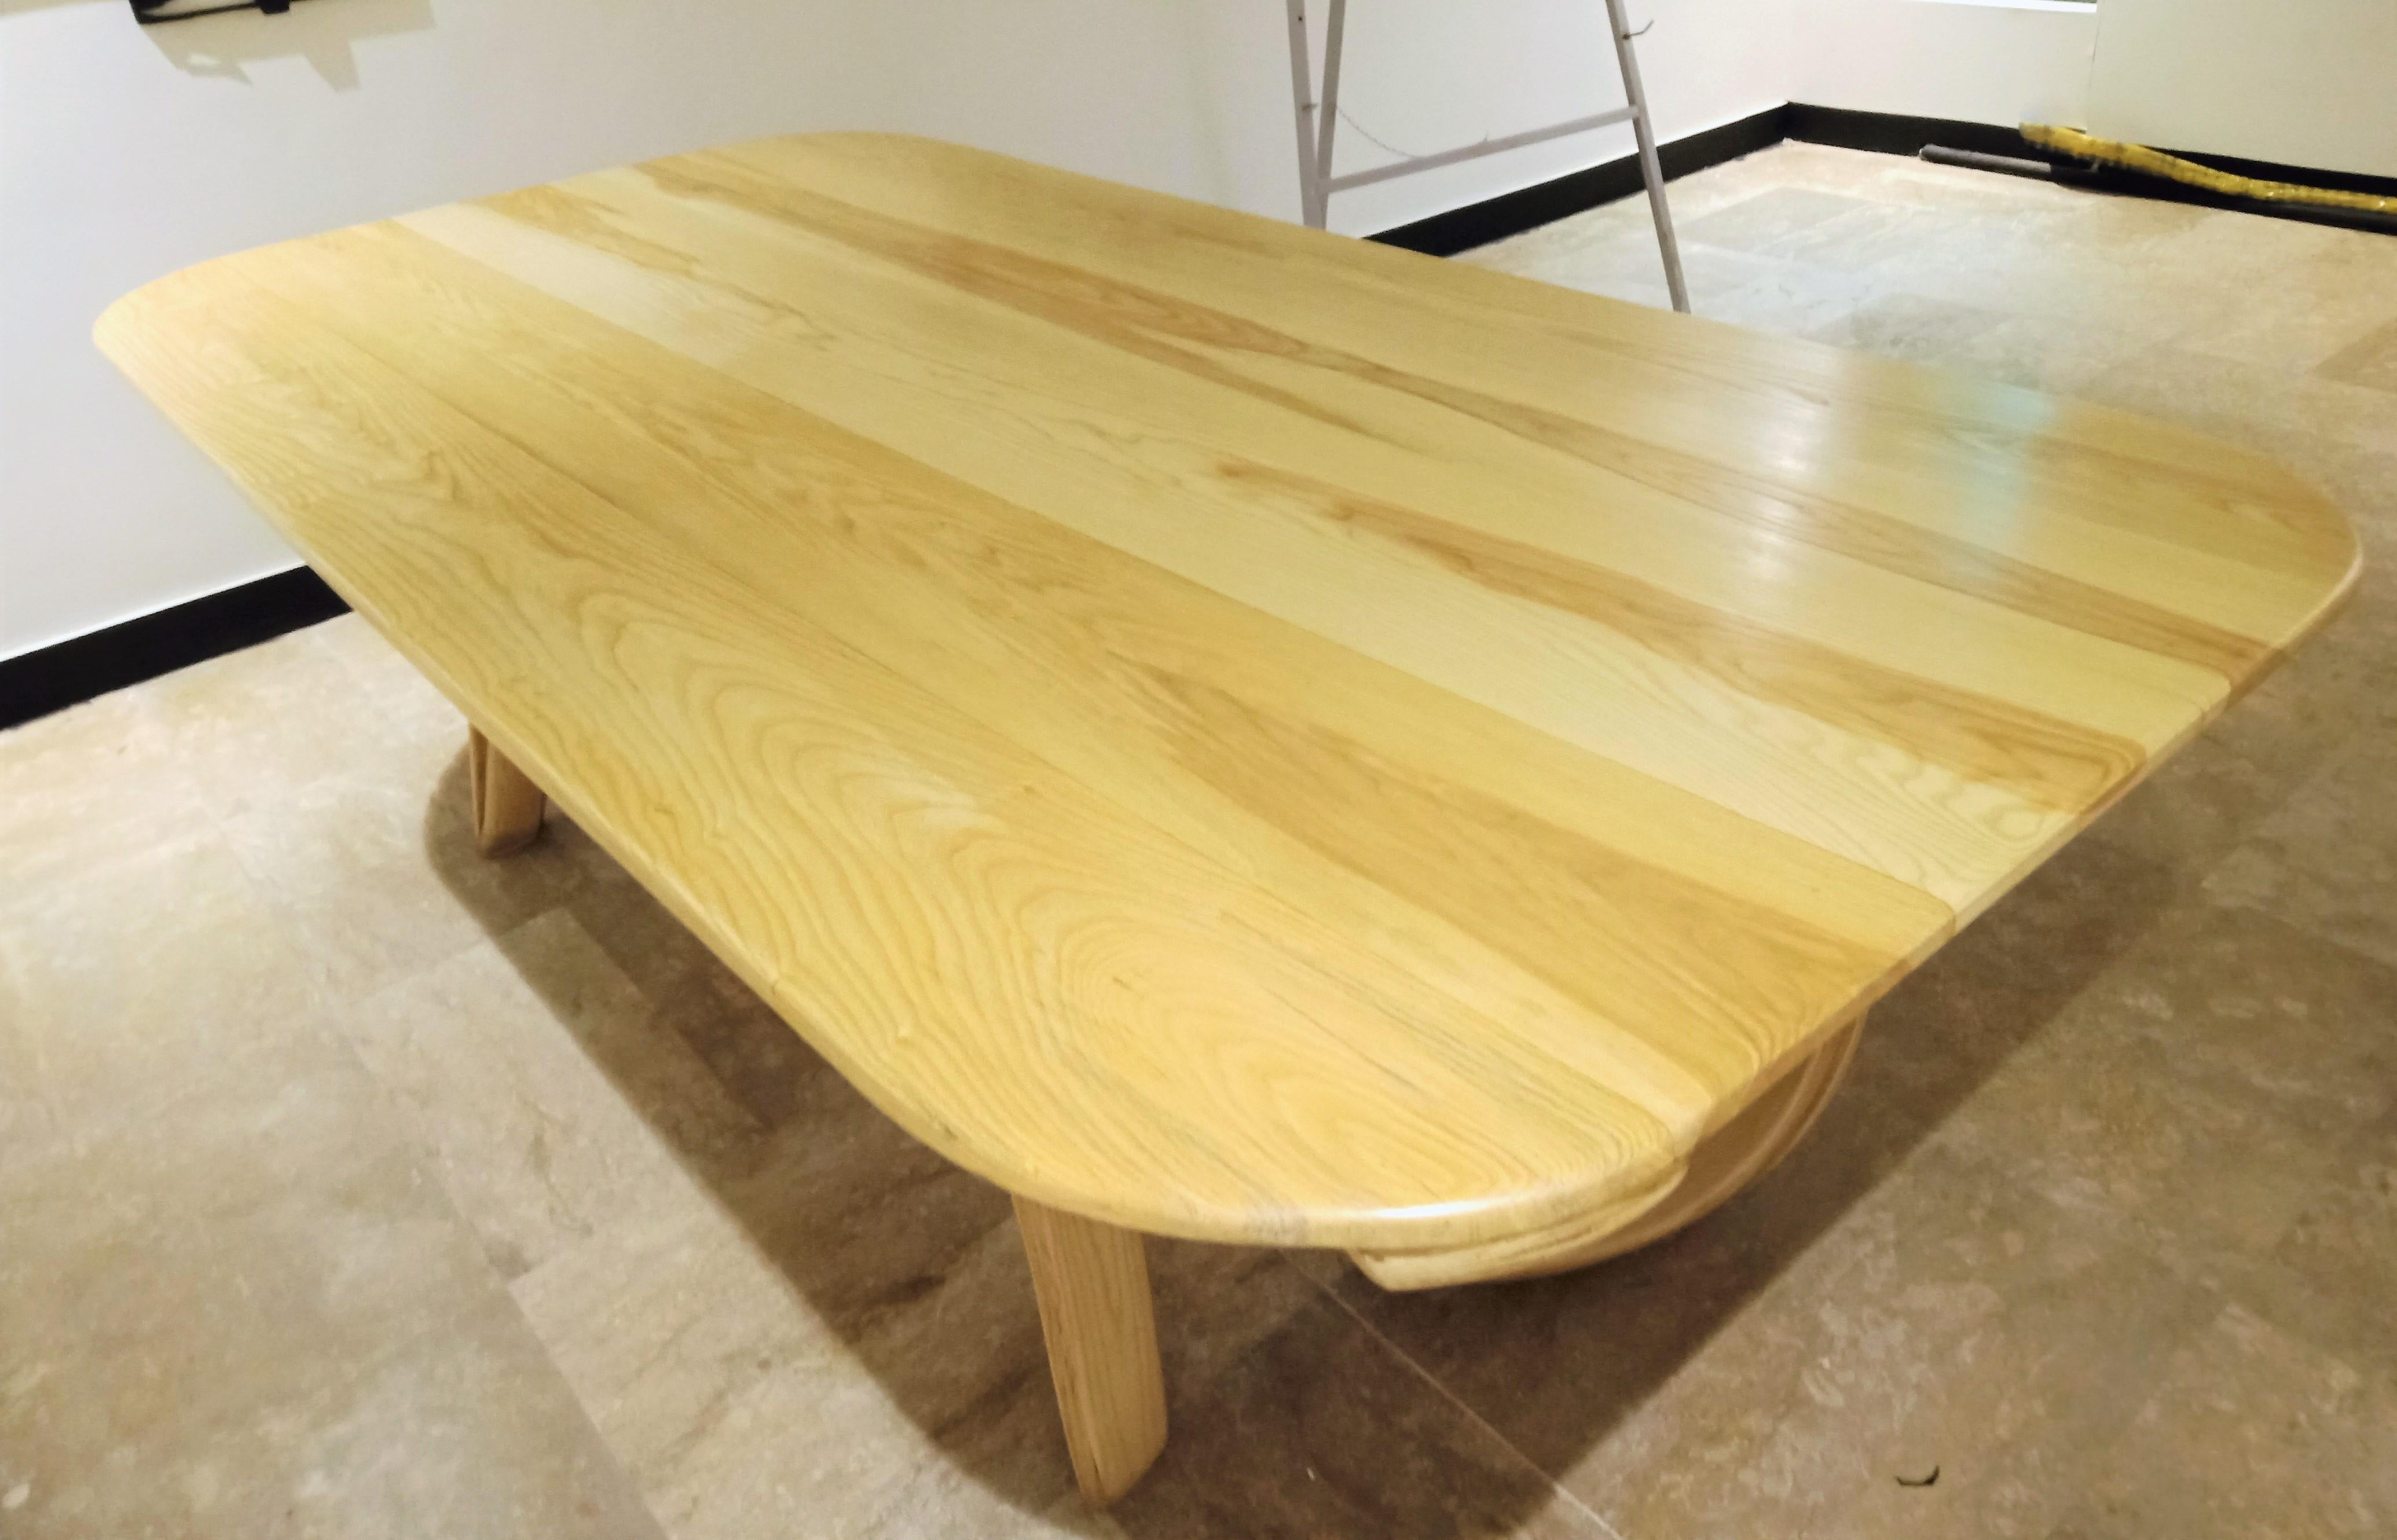 Selene - Dining table by Raka Studio - Bent Wood In New Condition For Sale In Cape Girardeau, MO